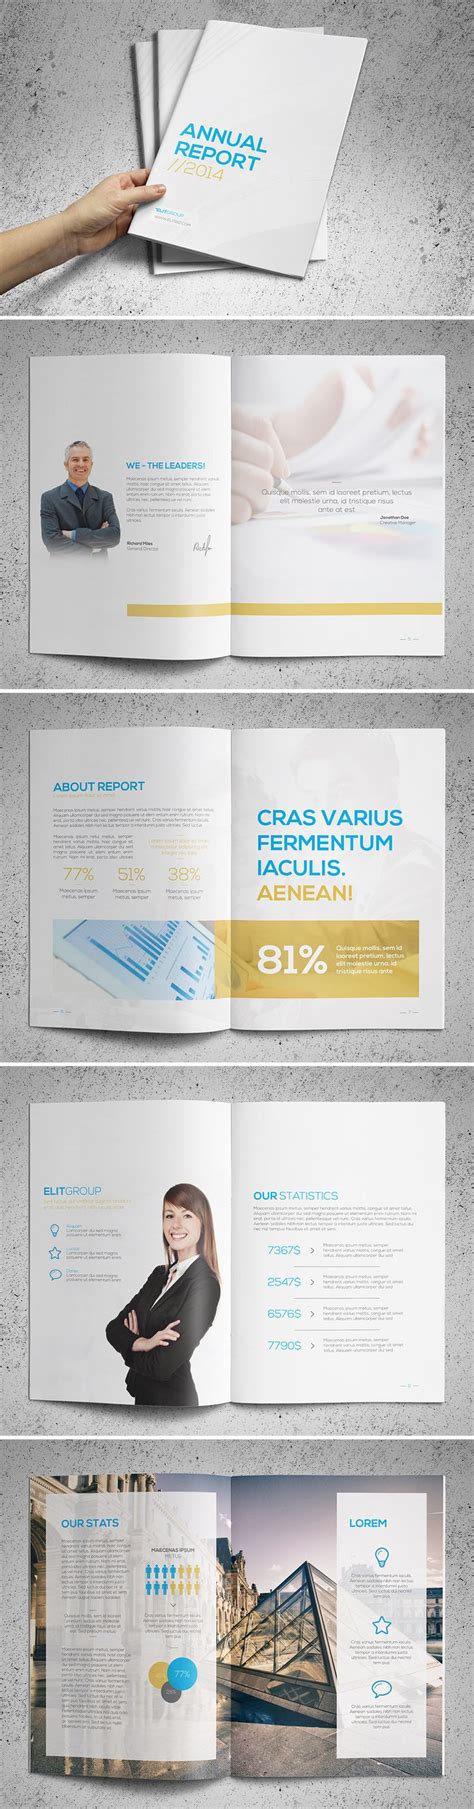 10 Weekly Report Template Example Psd Design Shop Fresh